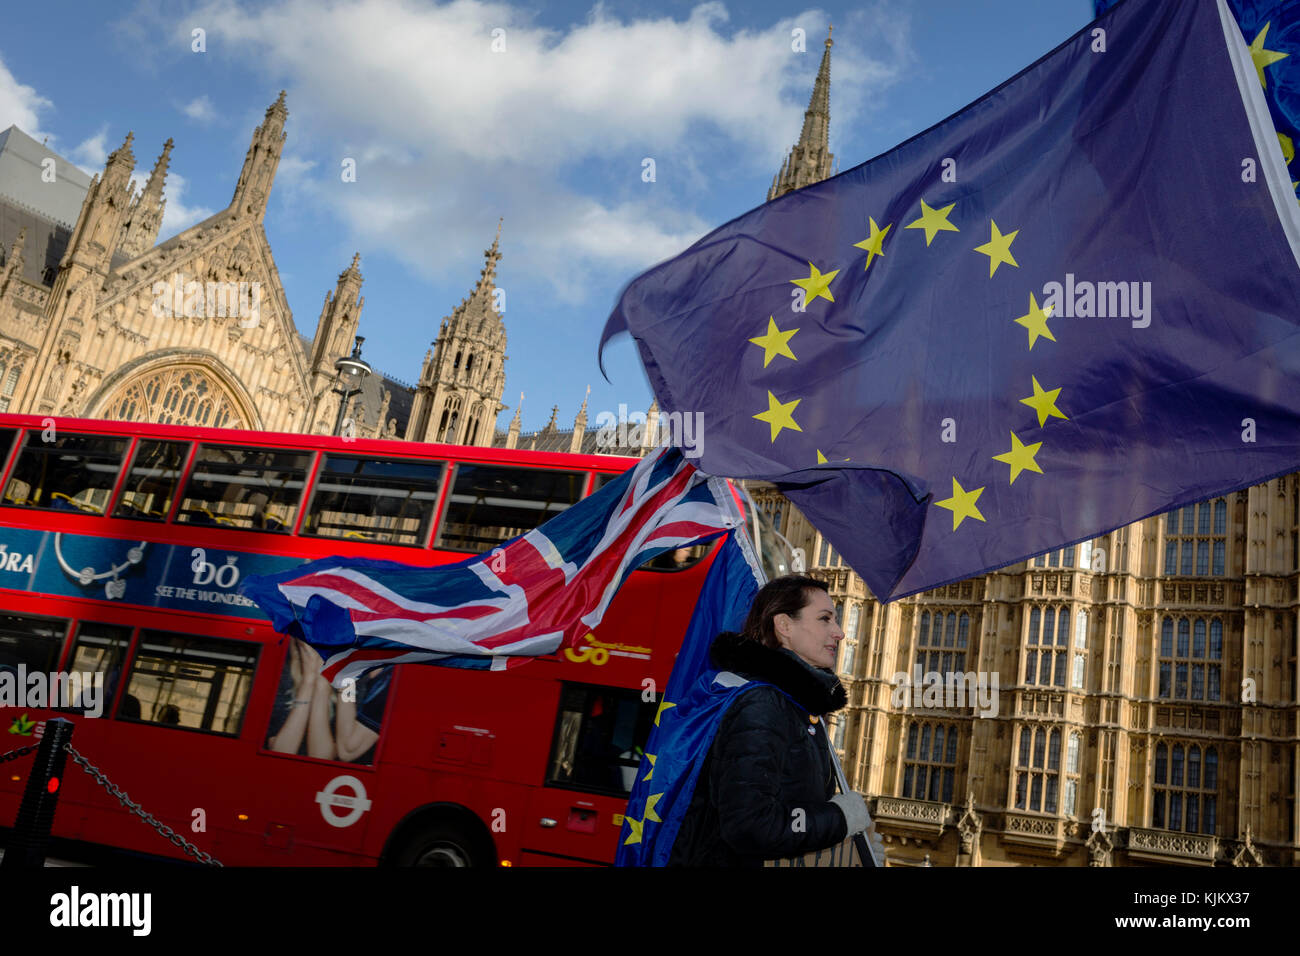 The stars of the EU flag fly over a London bus and the Houses of Parliament in Westminster, seat of government and power of the United Kingdom during Brexit negotiations with Brussels, on 23rd November 2017, in London England. Stock Photo